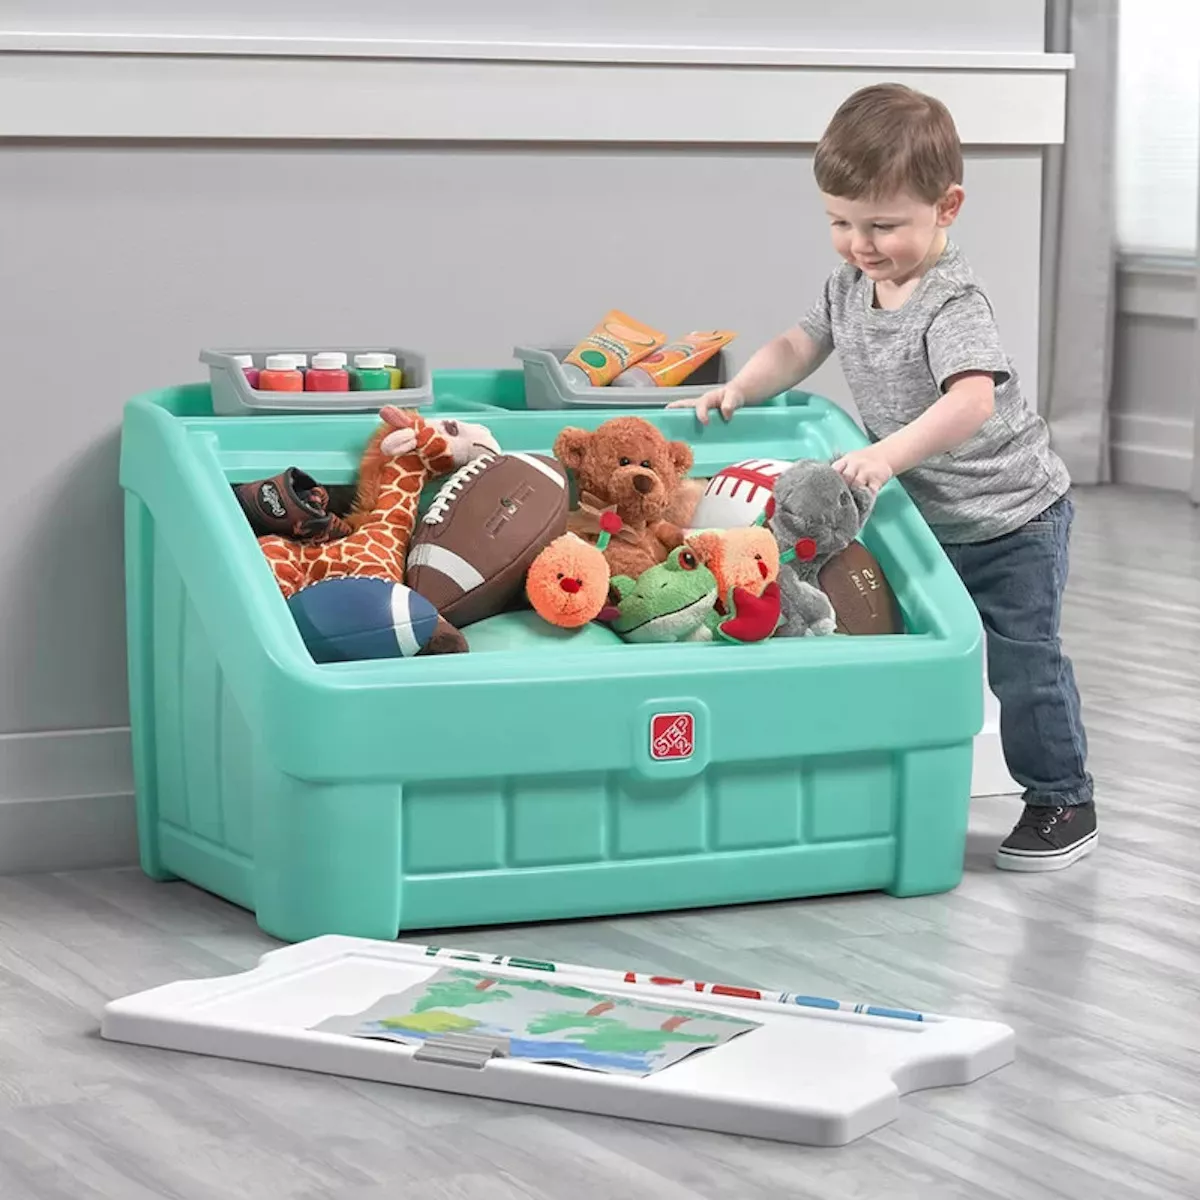 Laptop Duplicaat Overjas Playroom a Mess? 11 Products to Organize Toys and Books